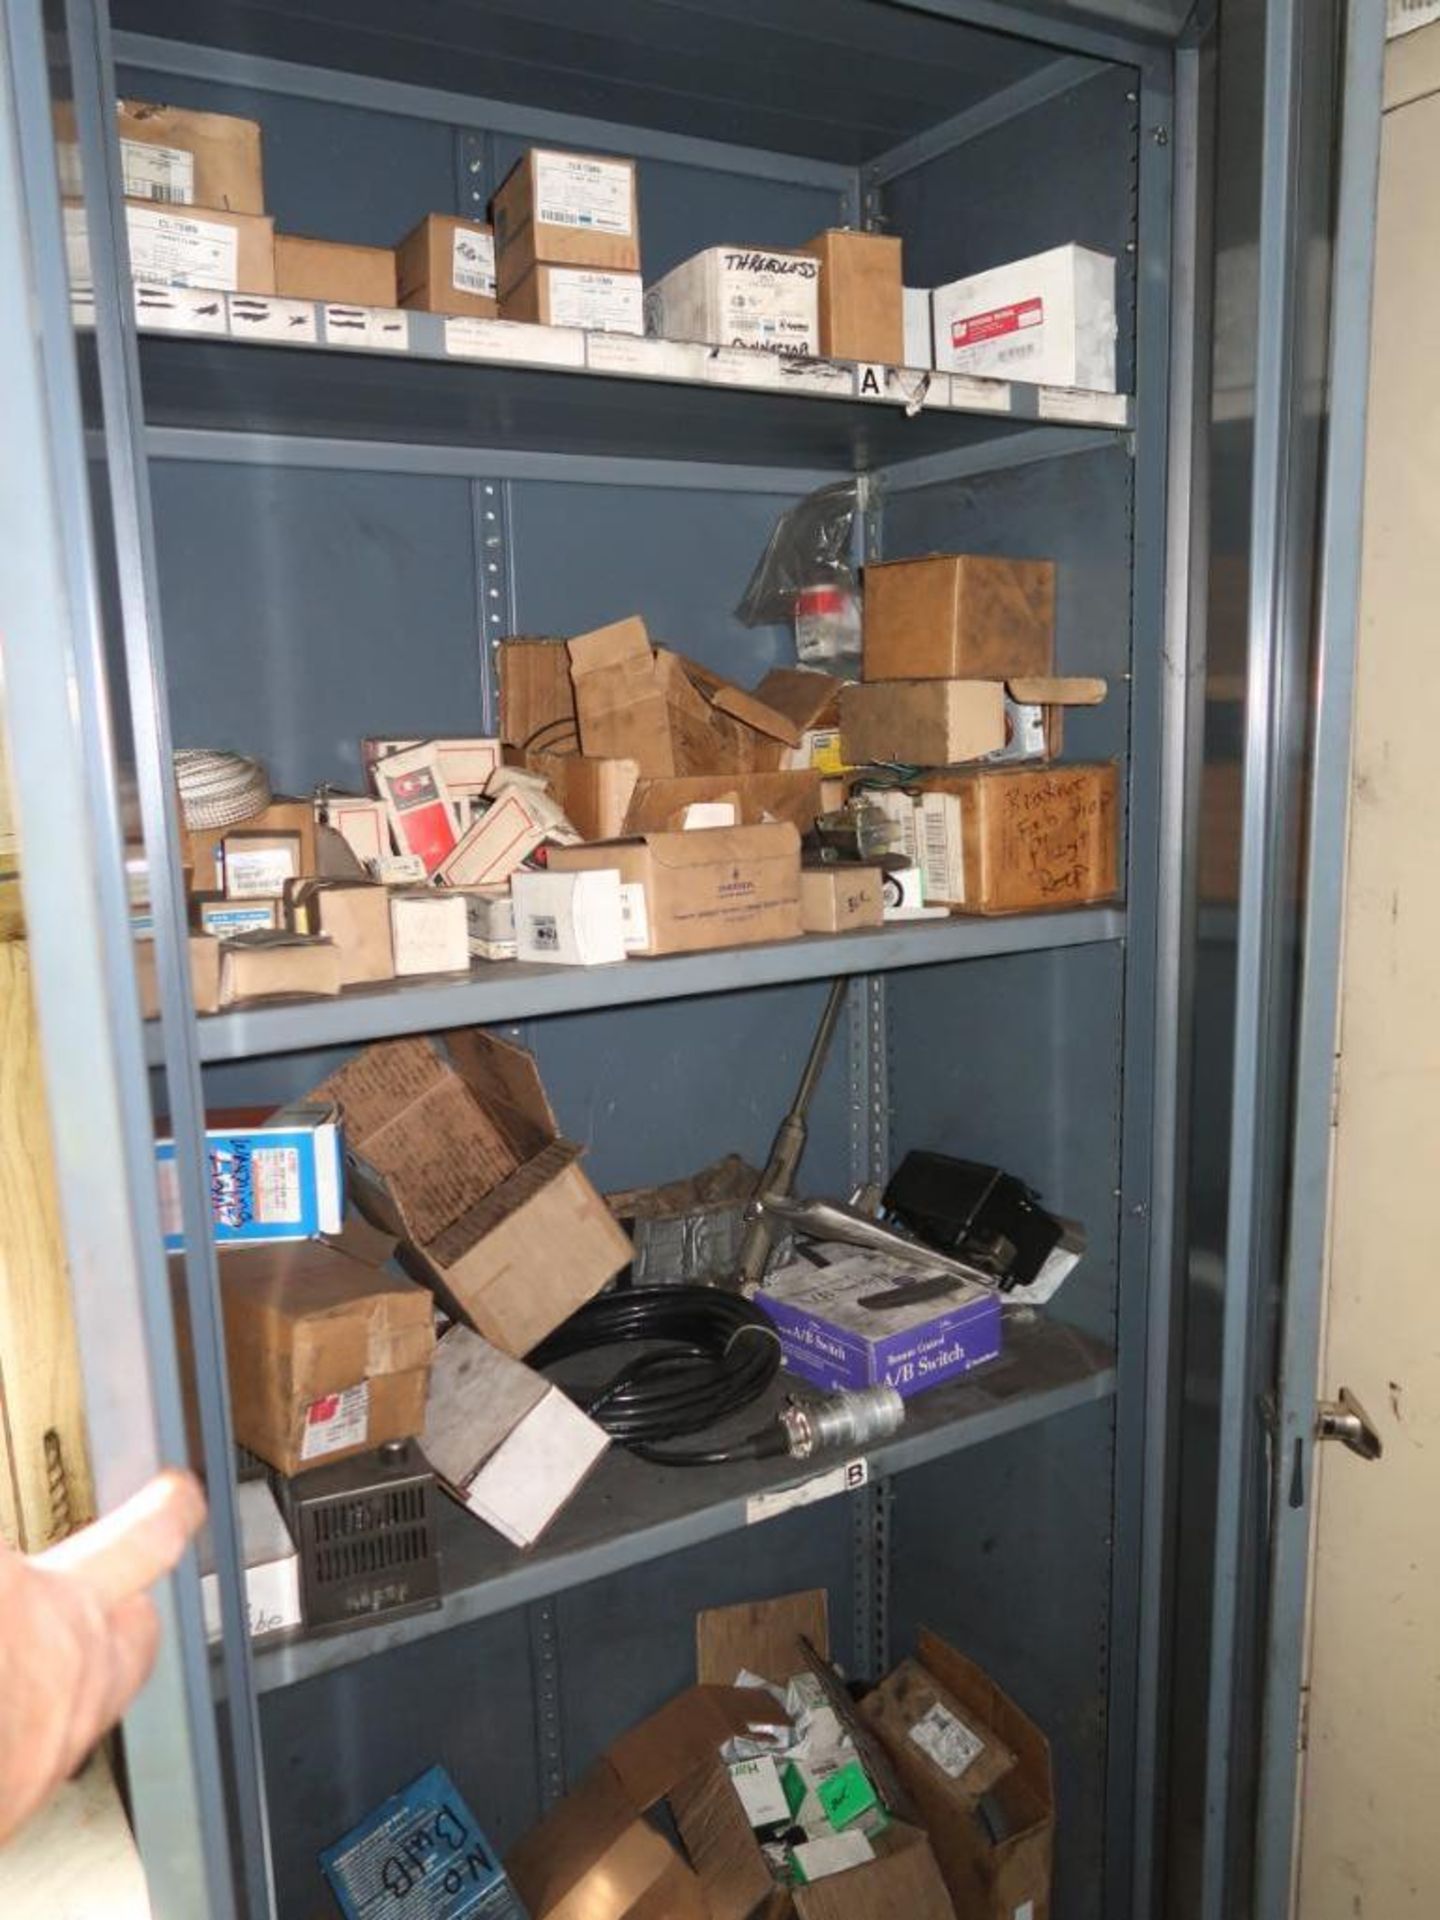 Contents of Room, Shelving, Cabinets, Electrical Supplies (go to garage) - Image 6 of 8